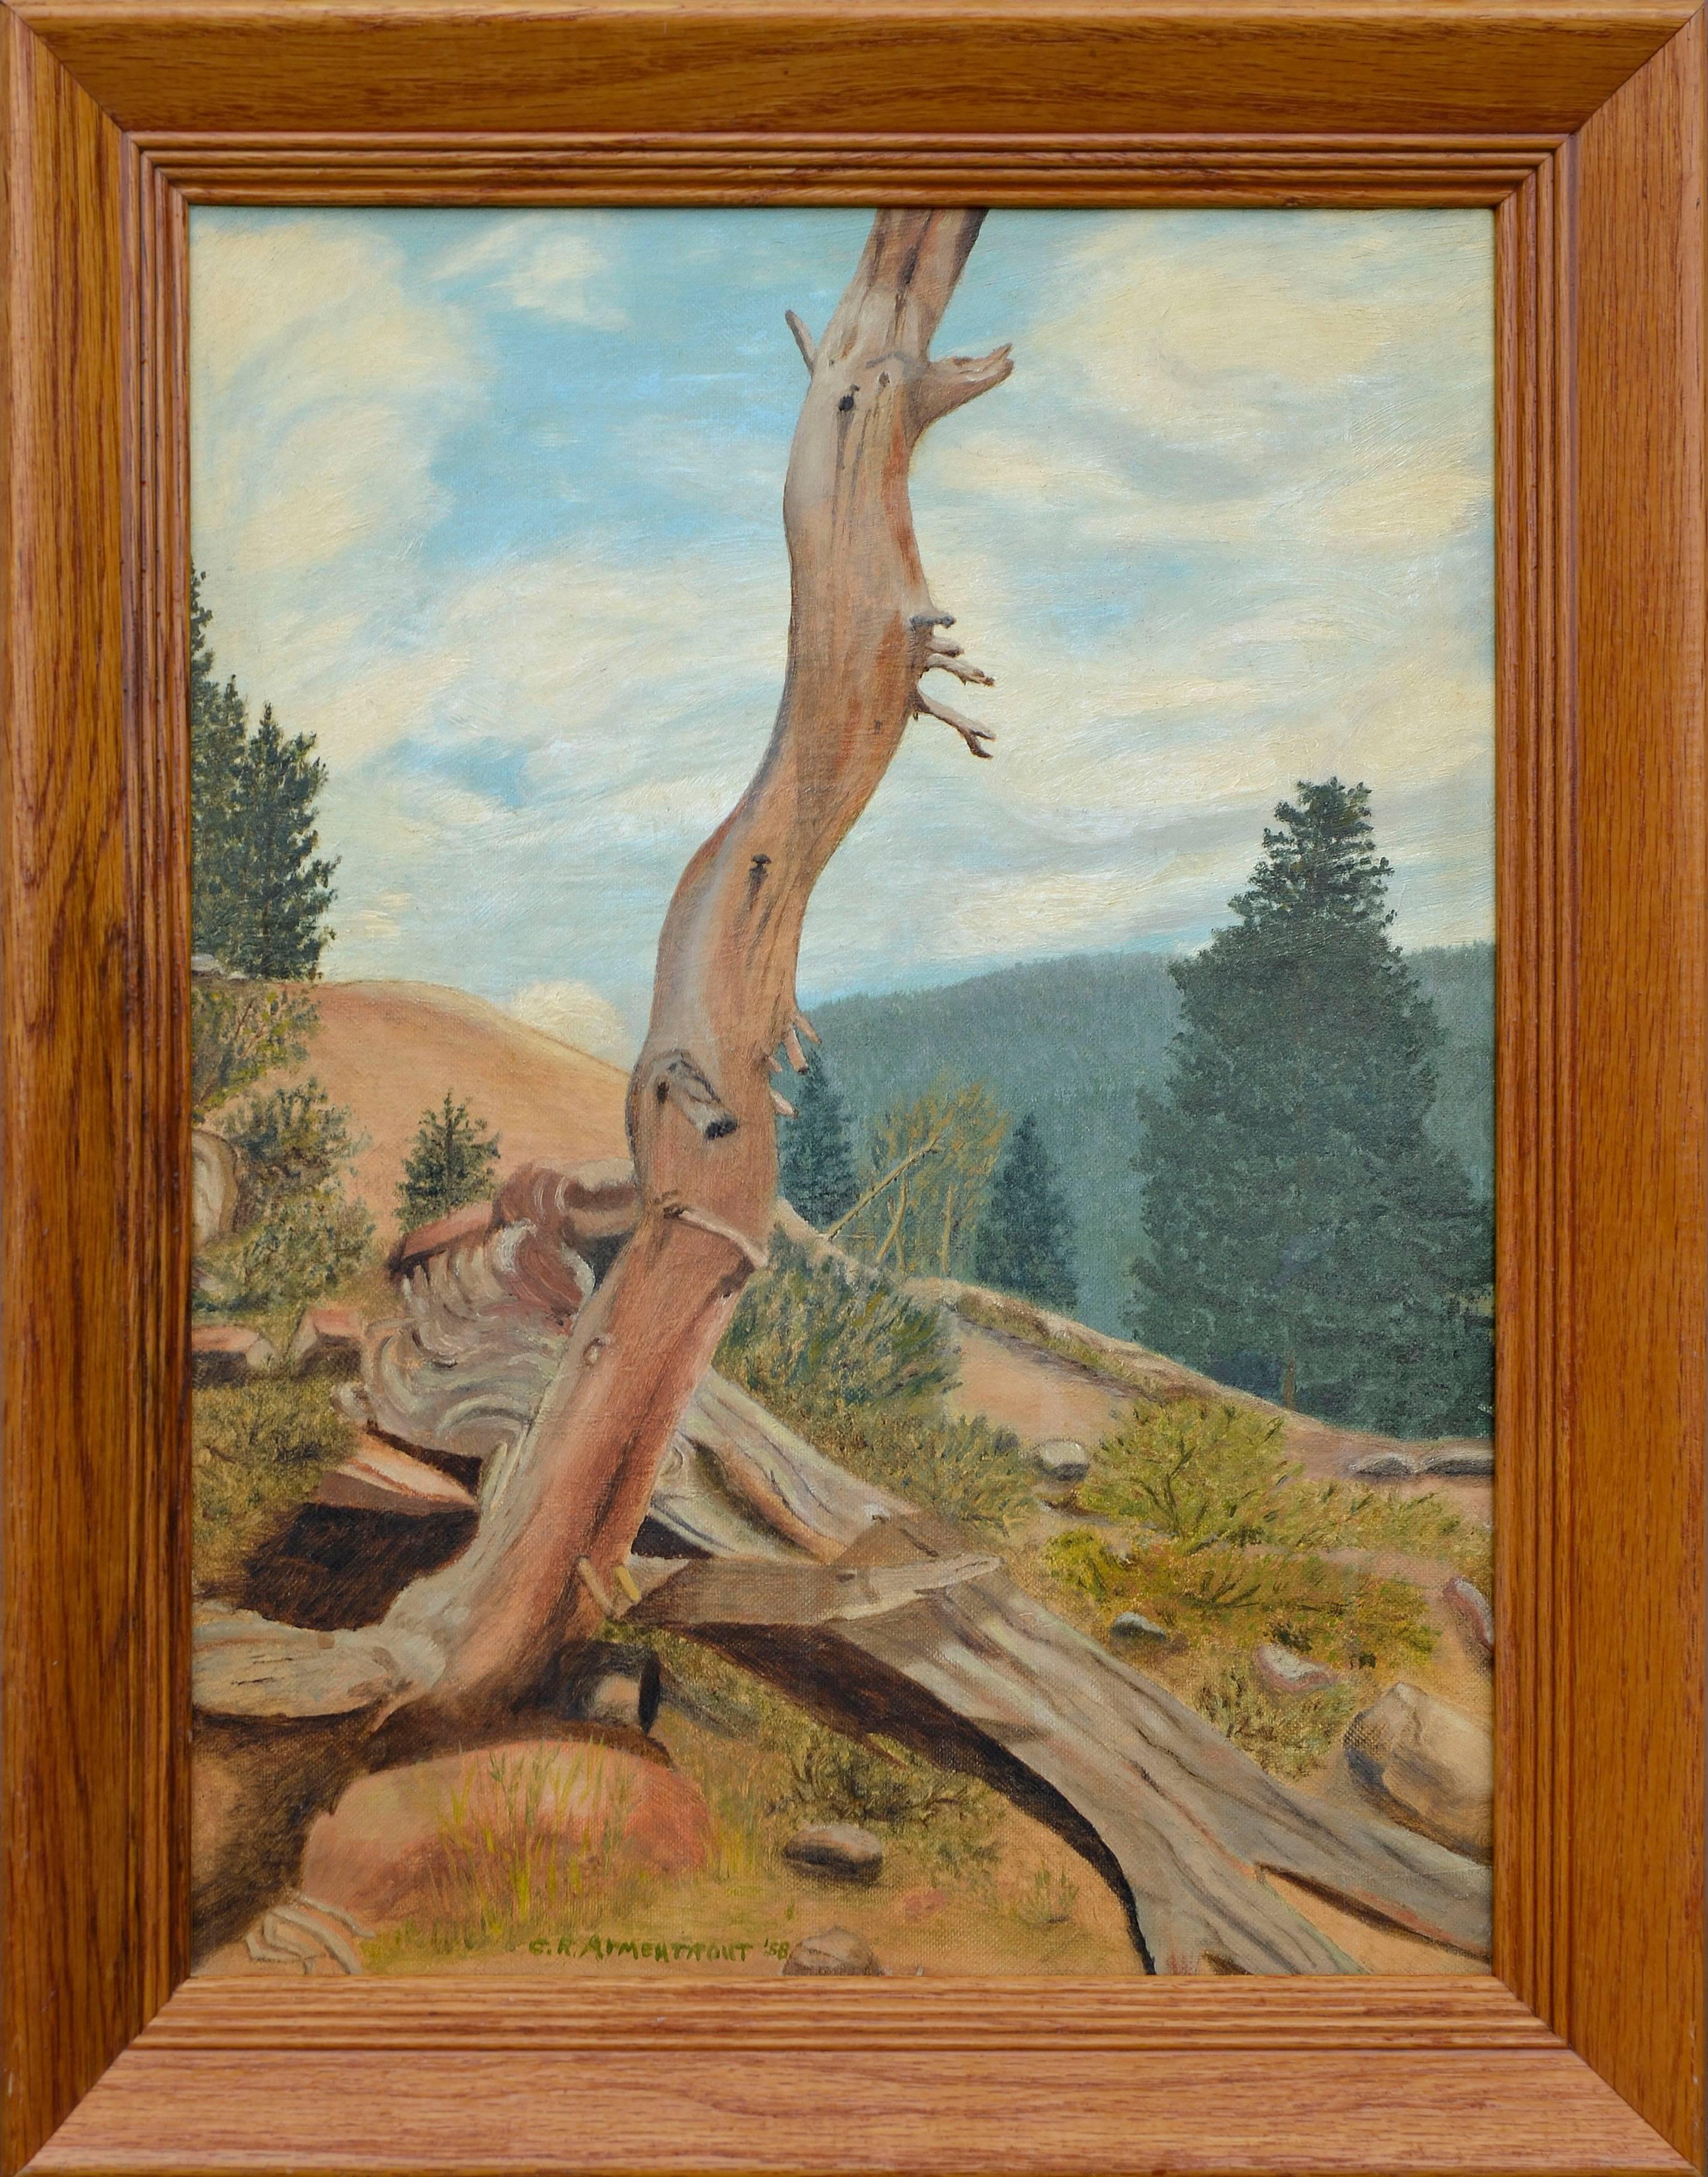 Coral R. Armentrout Landscape Painting - "Struggle at Timber Line, Rocky Mountain National Park, Colorado" - Landscape